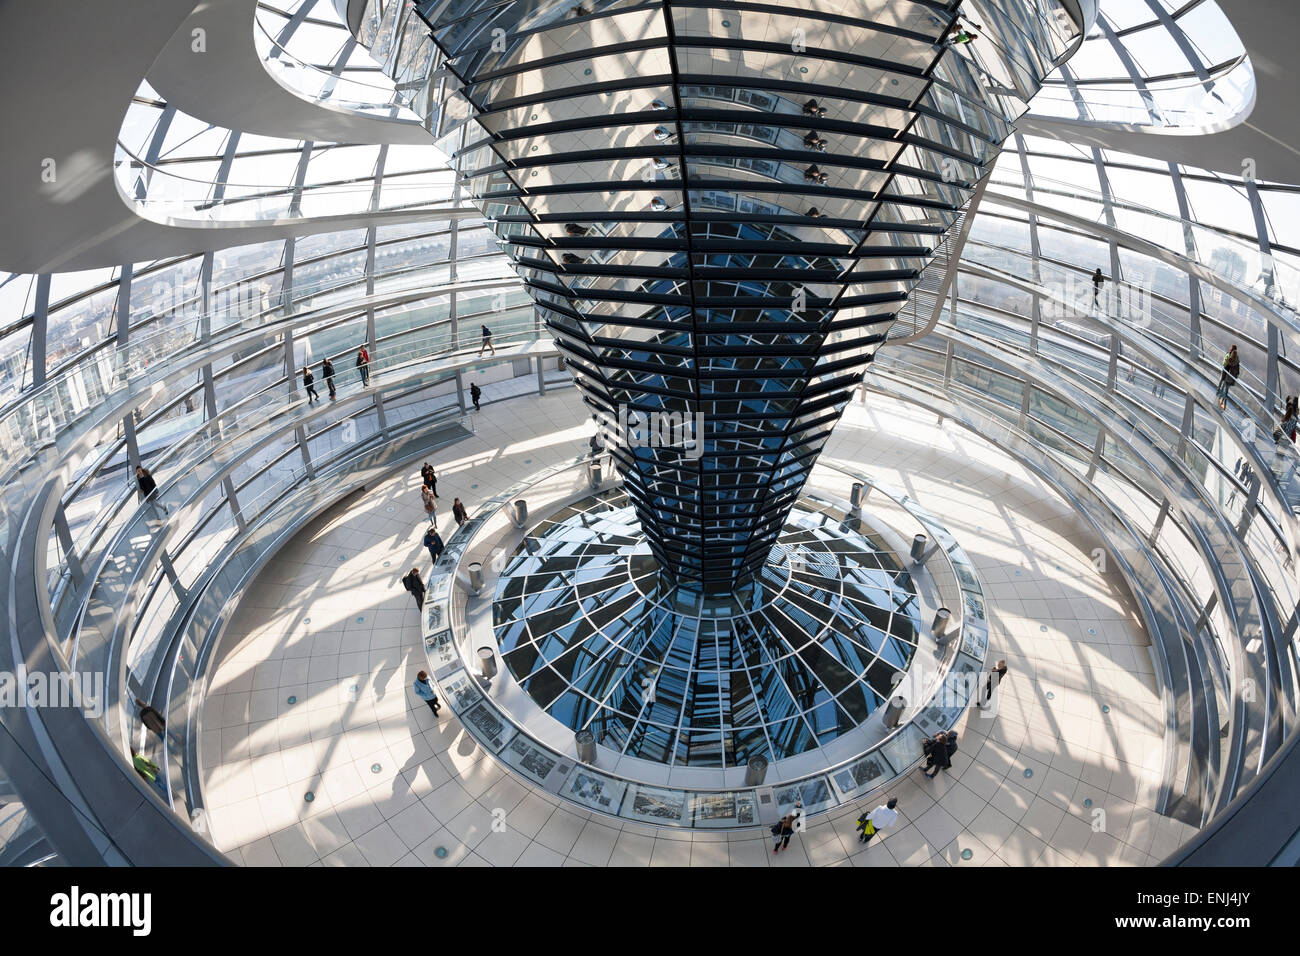 Interior of the cupola, designed by Sir Norman Foster, Reichstag German Parliament building Berlin, Germany Stock Photo